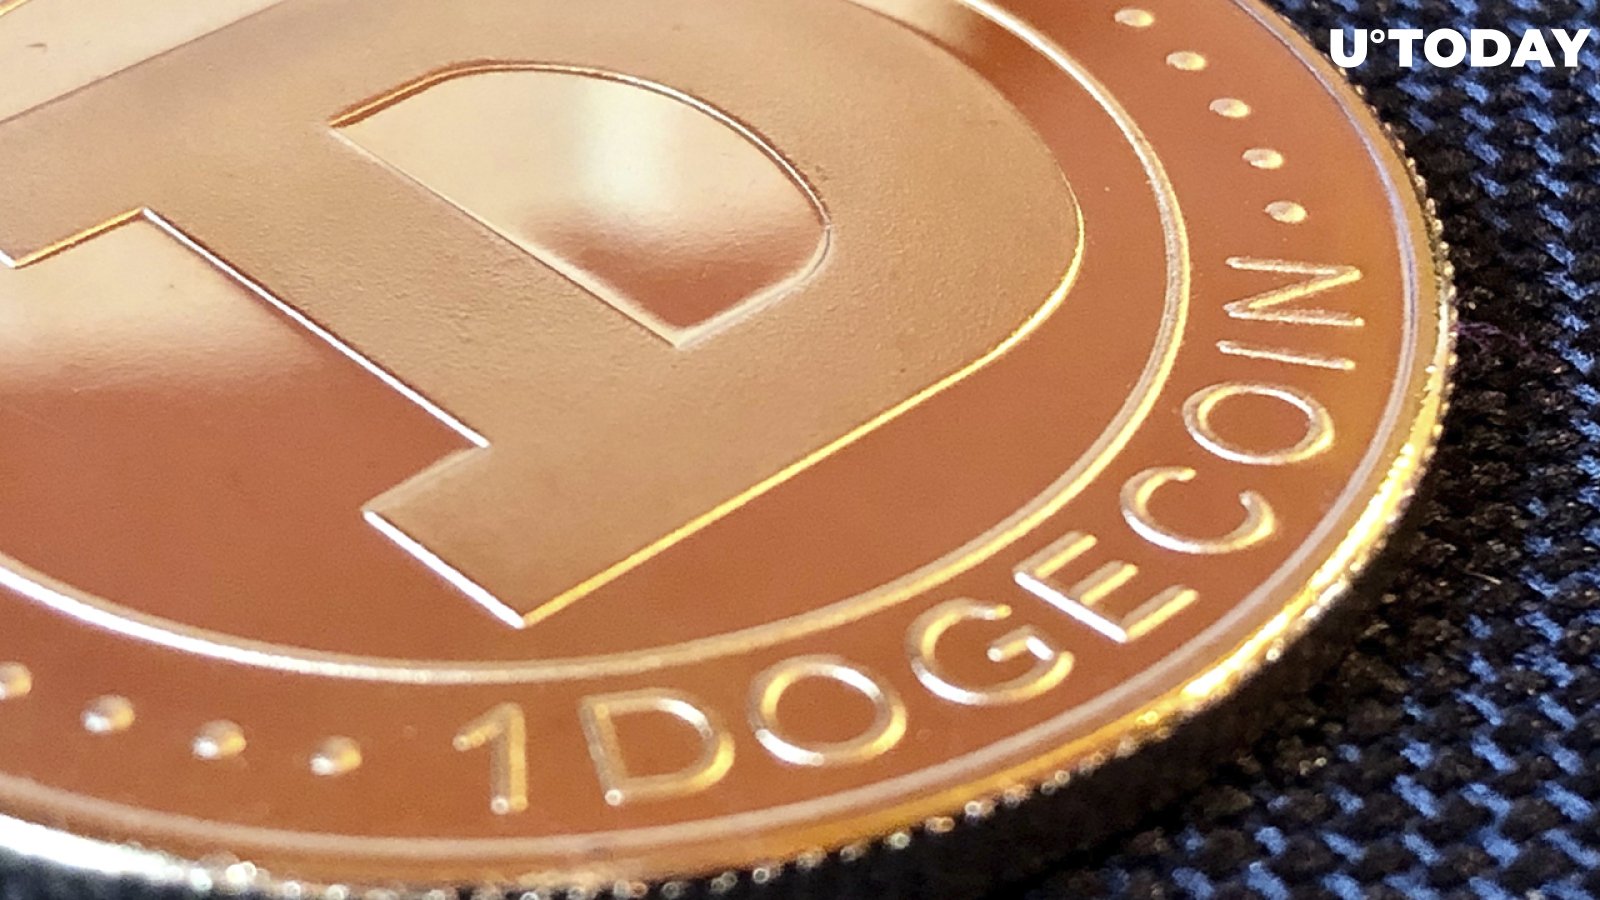 Dogecoin Creator Made Only $3,000 by Developing Biggest Memecoin Ever